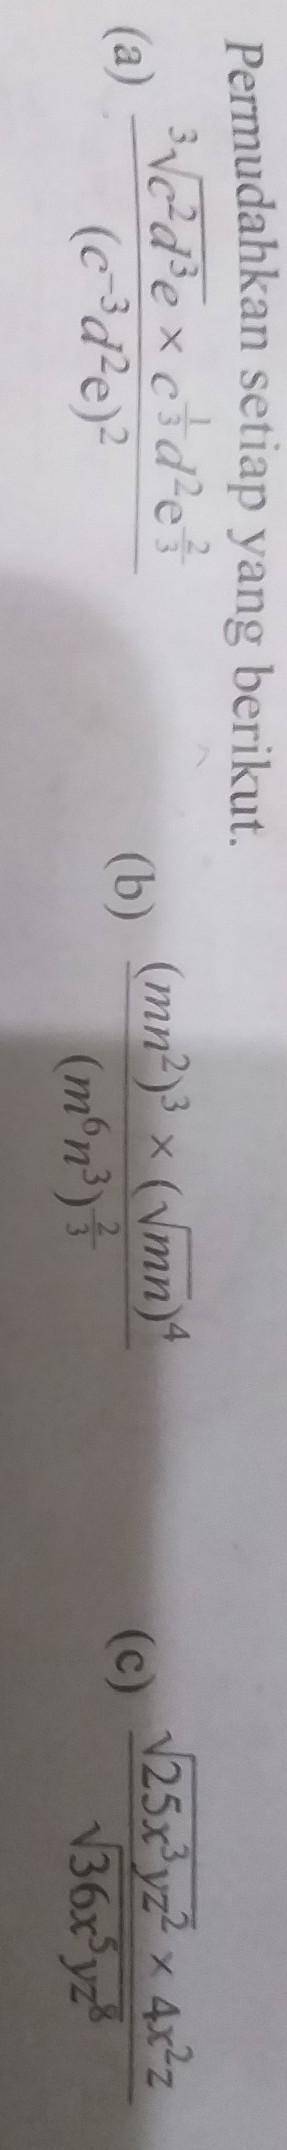 Please help me anawer this question math.simplify​